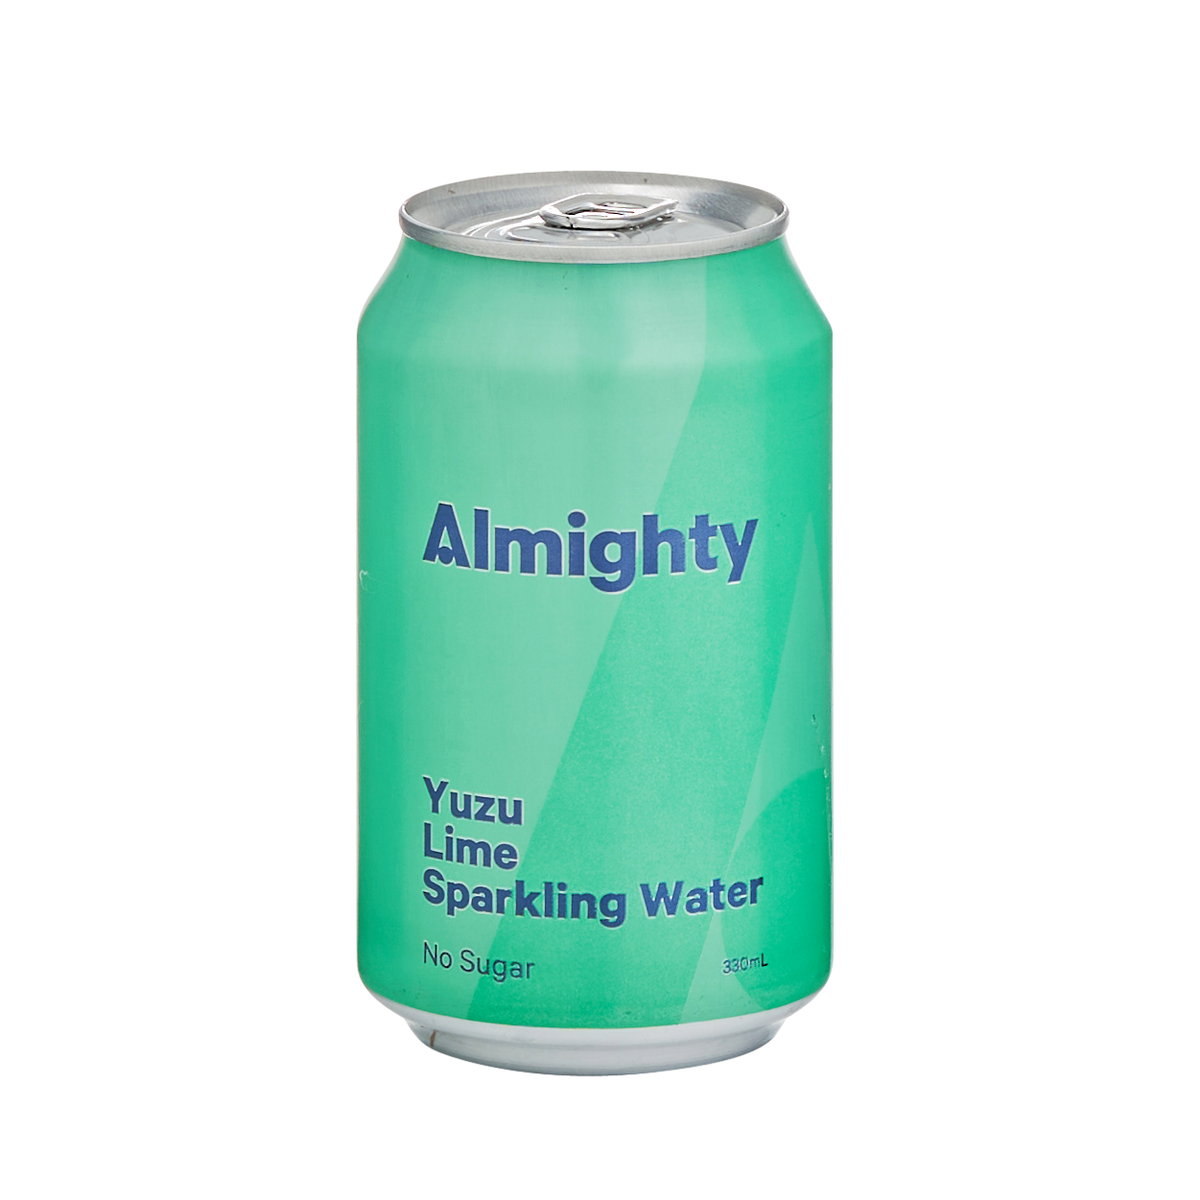 Almighty Sparkling Water